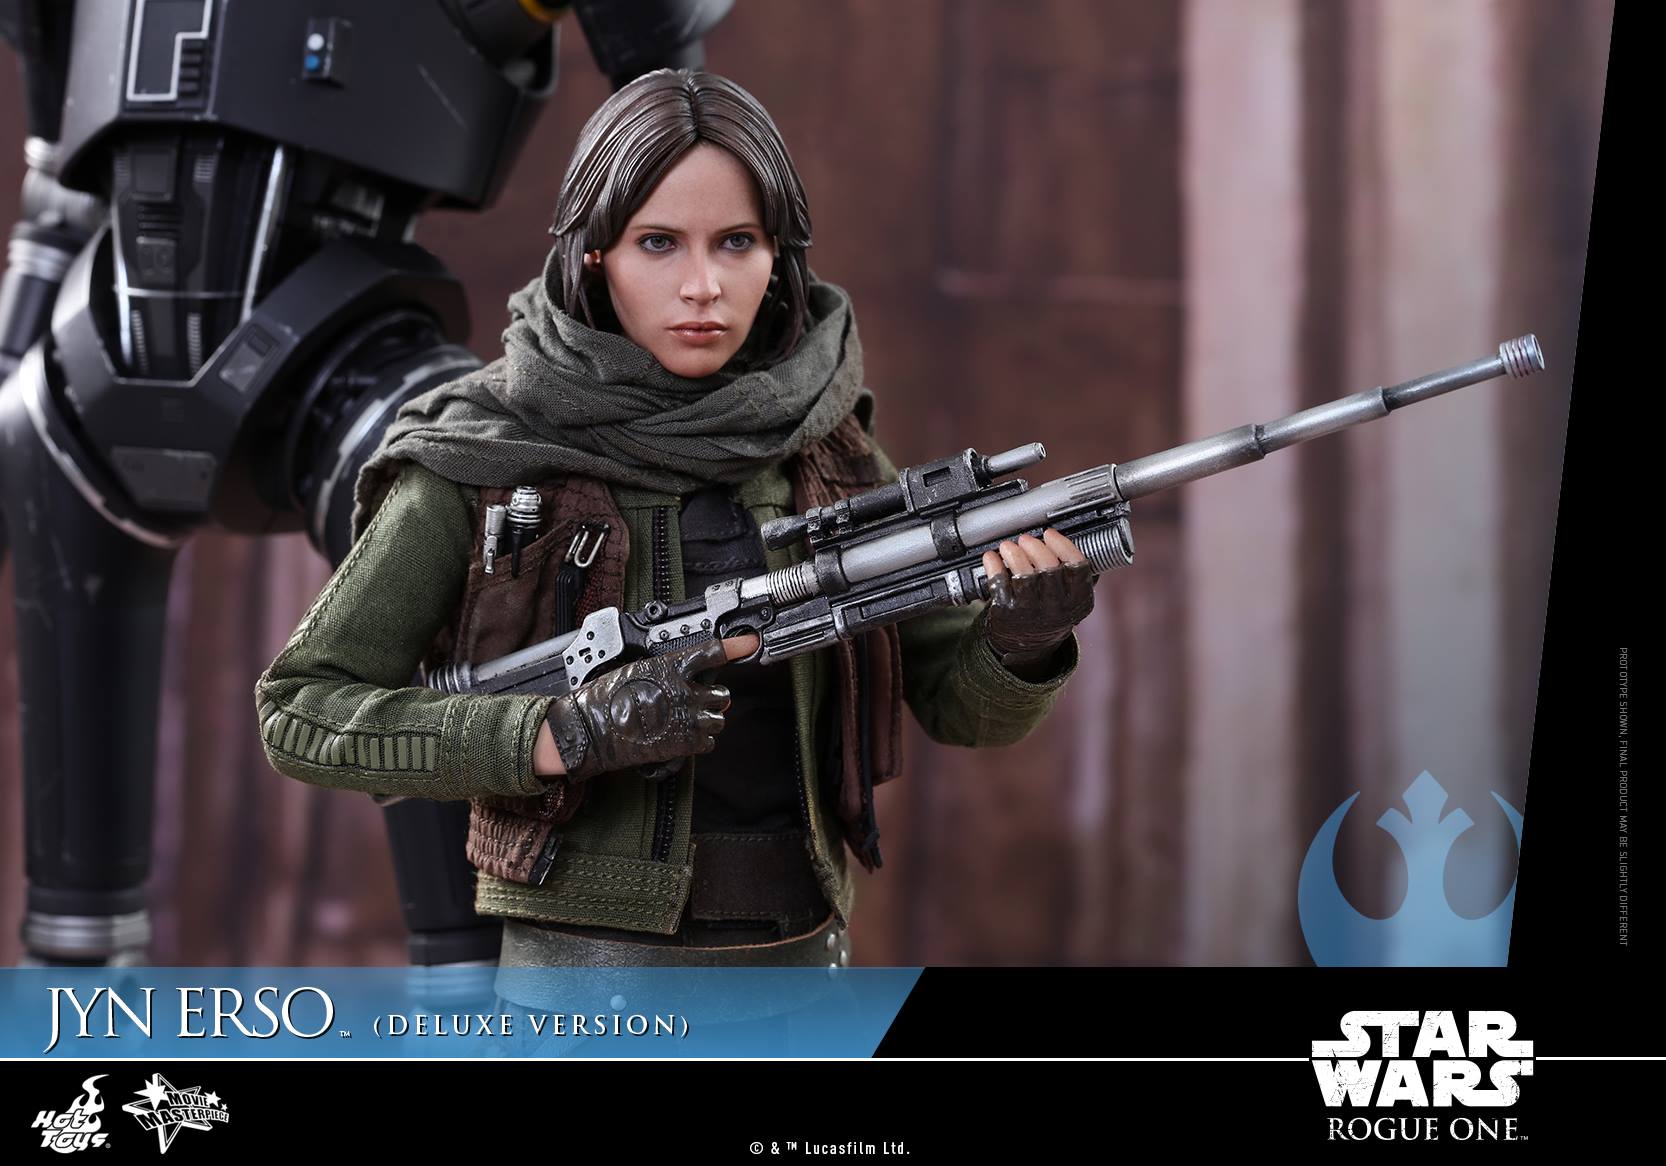 Rogue One Jyn Erso Hot Toy (Deluxe)